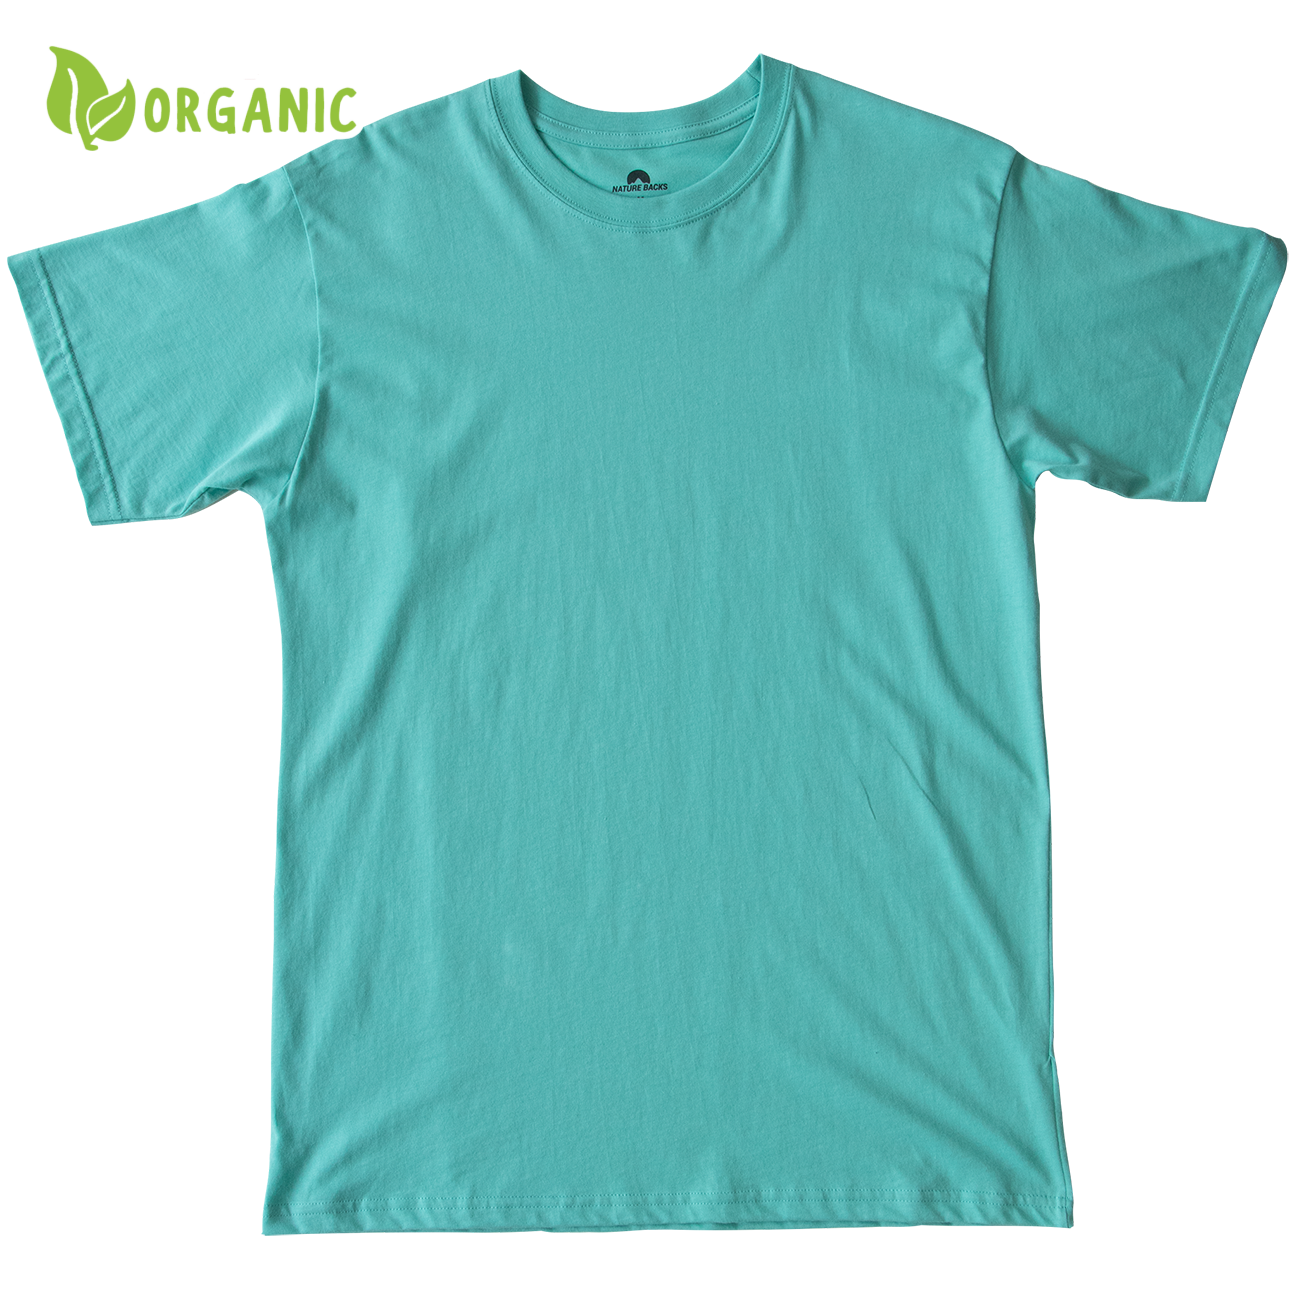 Nature Backs Short Sleeve 100% Organic Cotton T-Shirt | Minimalist Chalky Mint Short Sleeve made with Eco-Friendly Fibers Sustainably made in the USA 